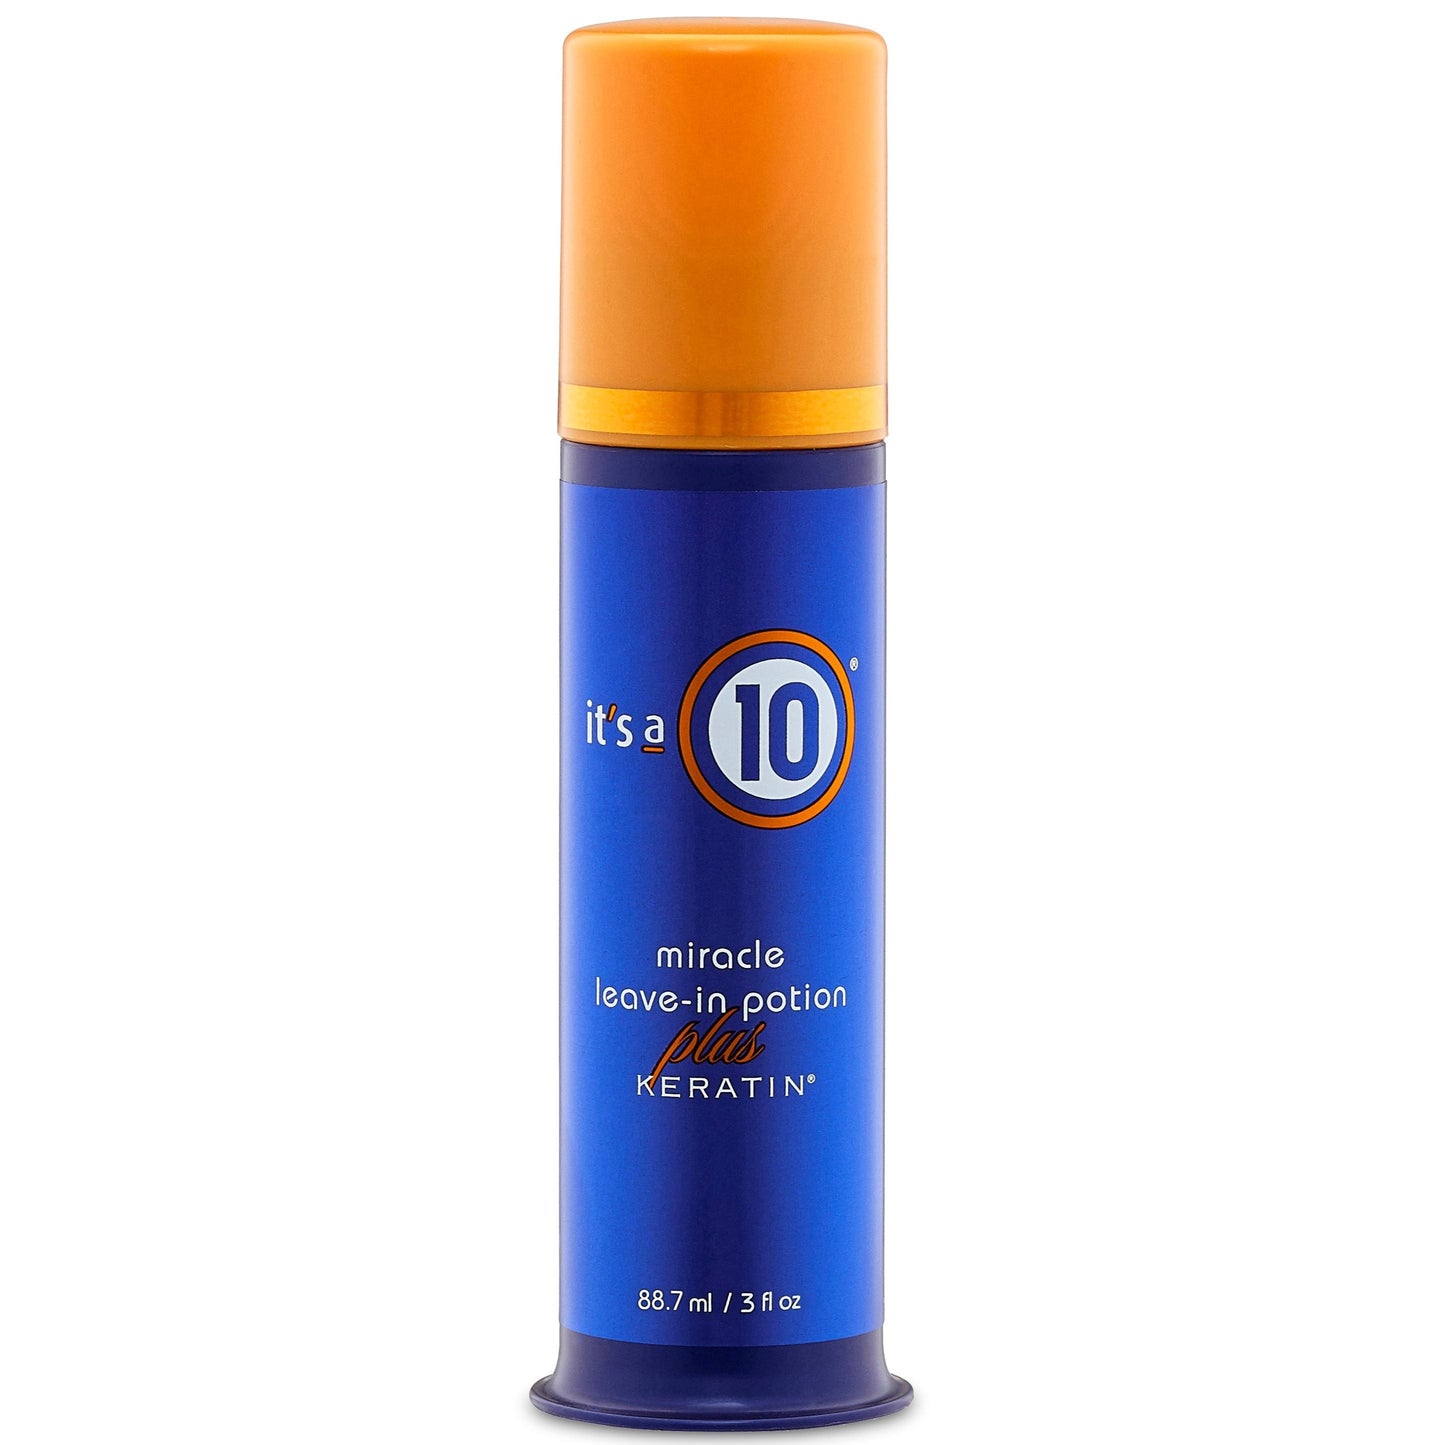 It's a 10 Miracle Leave-In Potion Plus Keratin